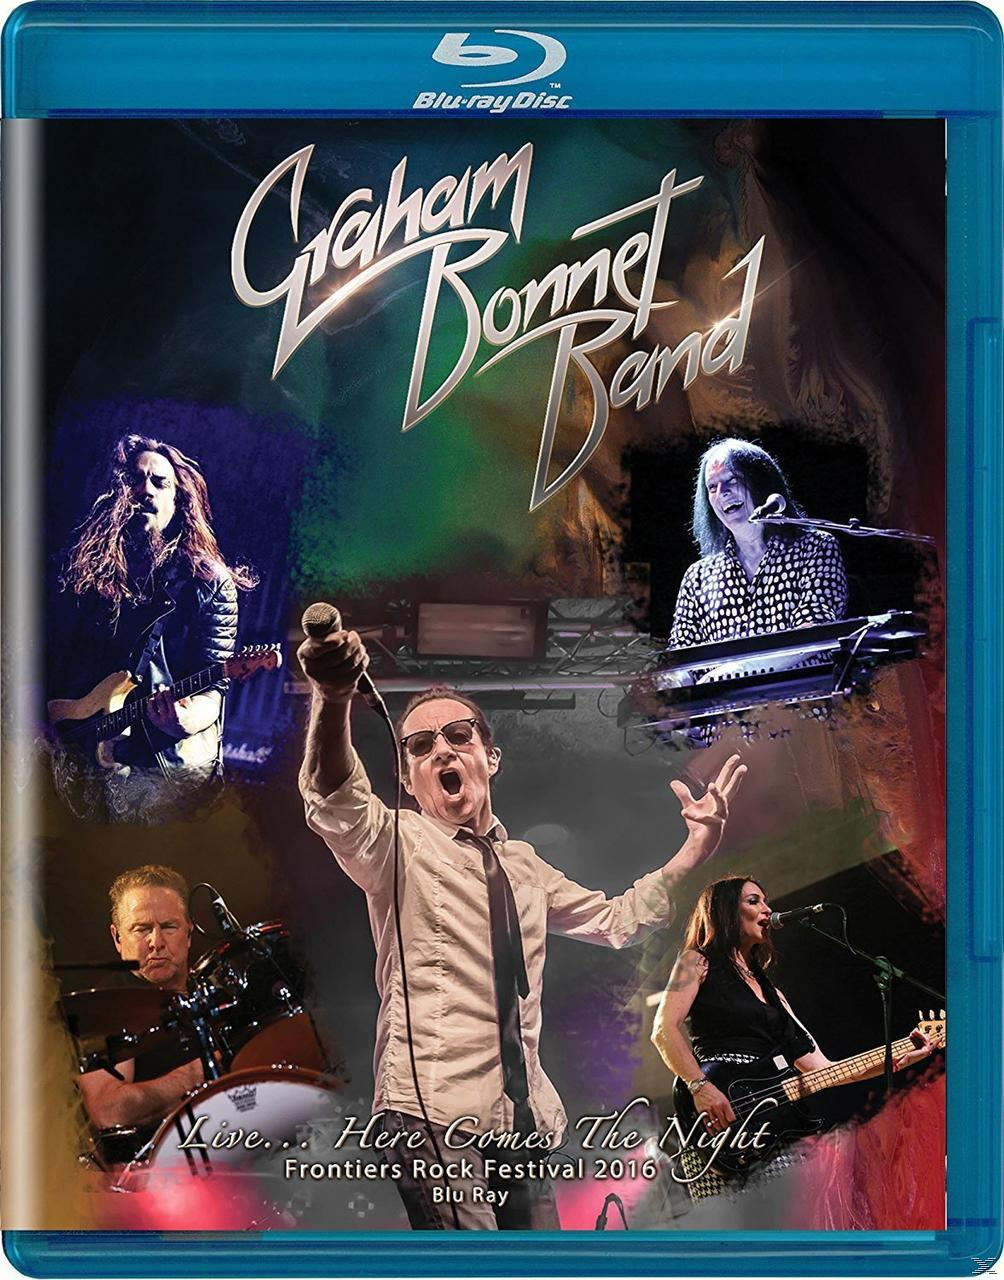 The Live...Here - (Blu-ray) - Comes Night Bonnet Band Graham